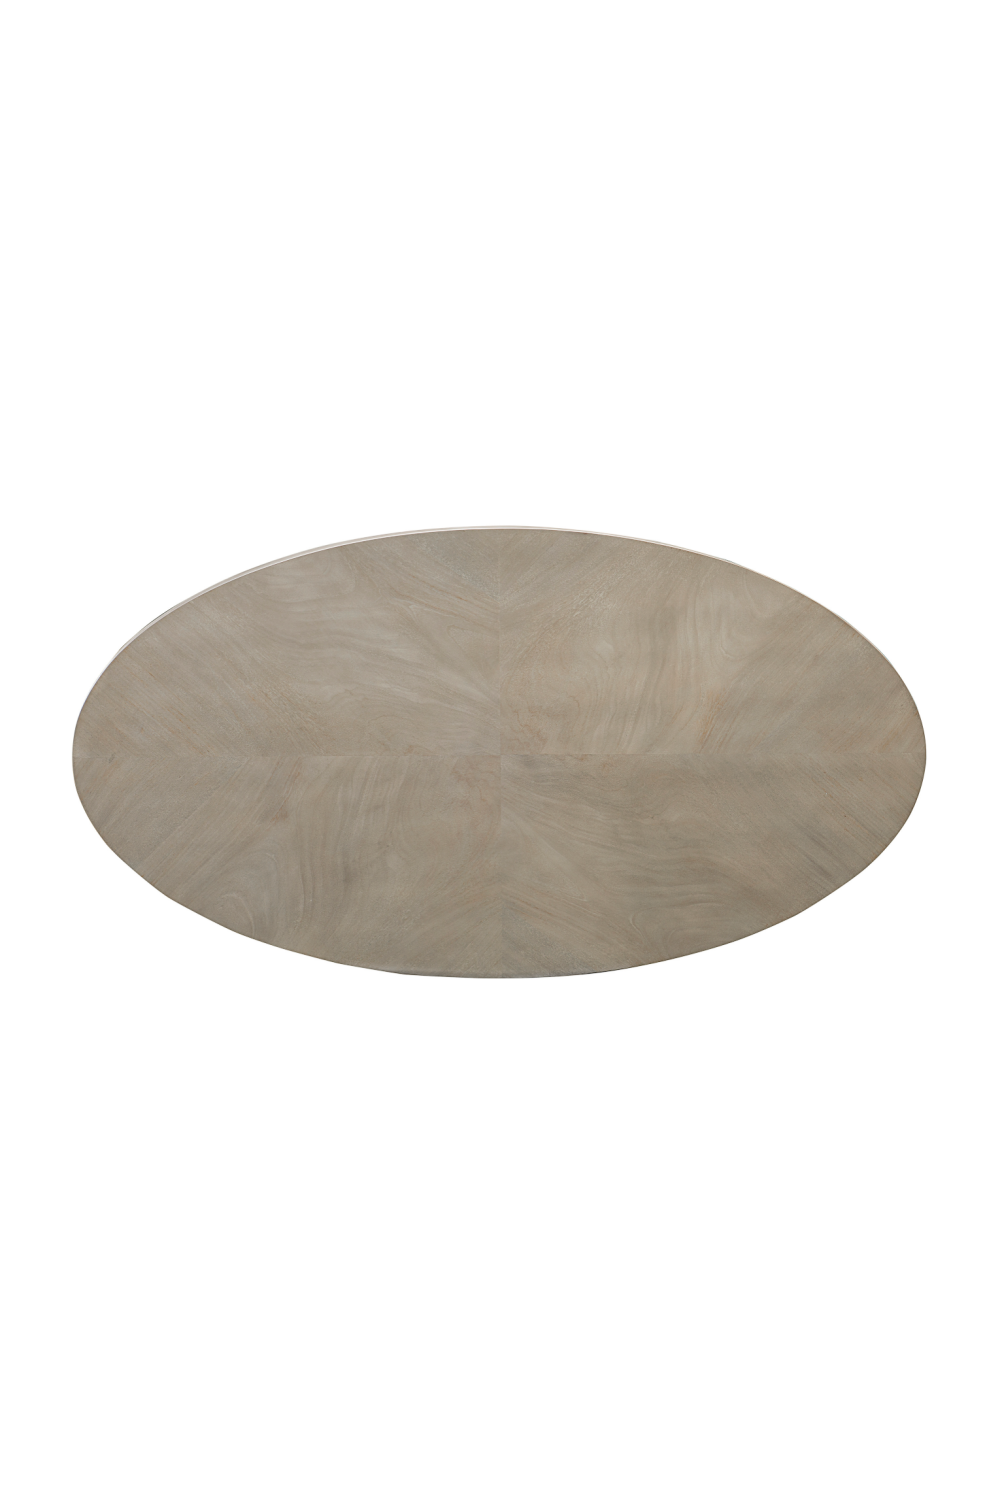 Oval Mahogany Veneer Cocktail Table | Caracole Front And Center |  Oroa.com